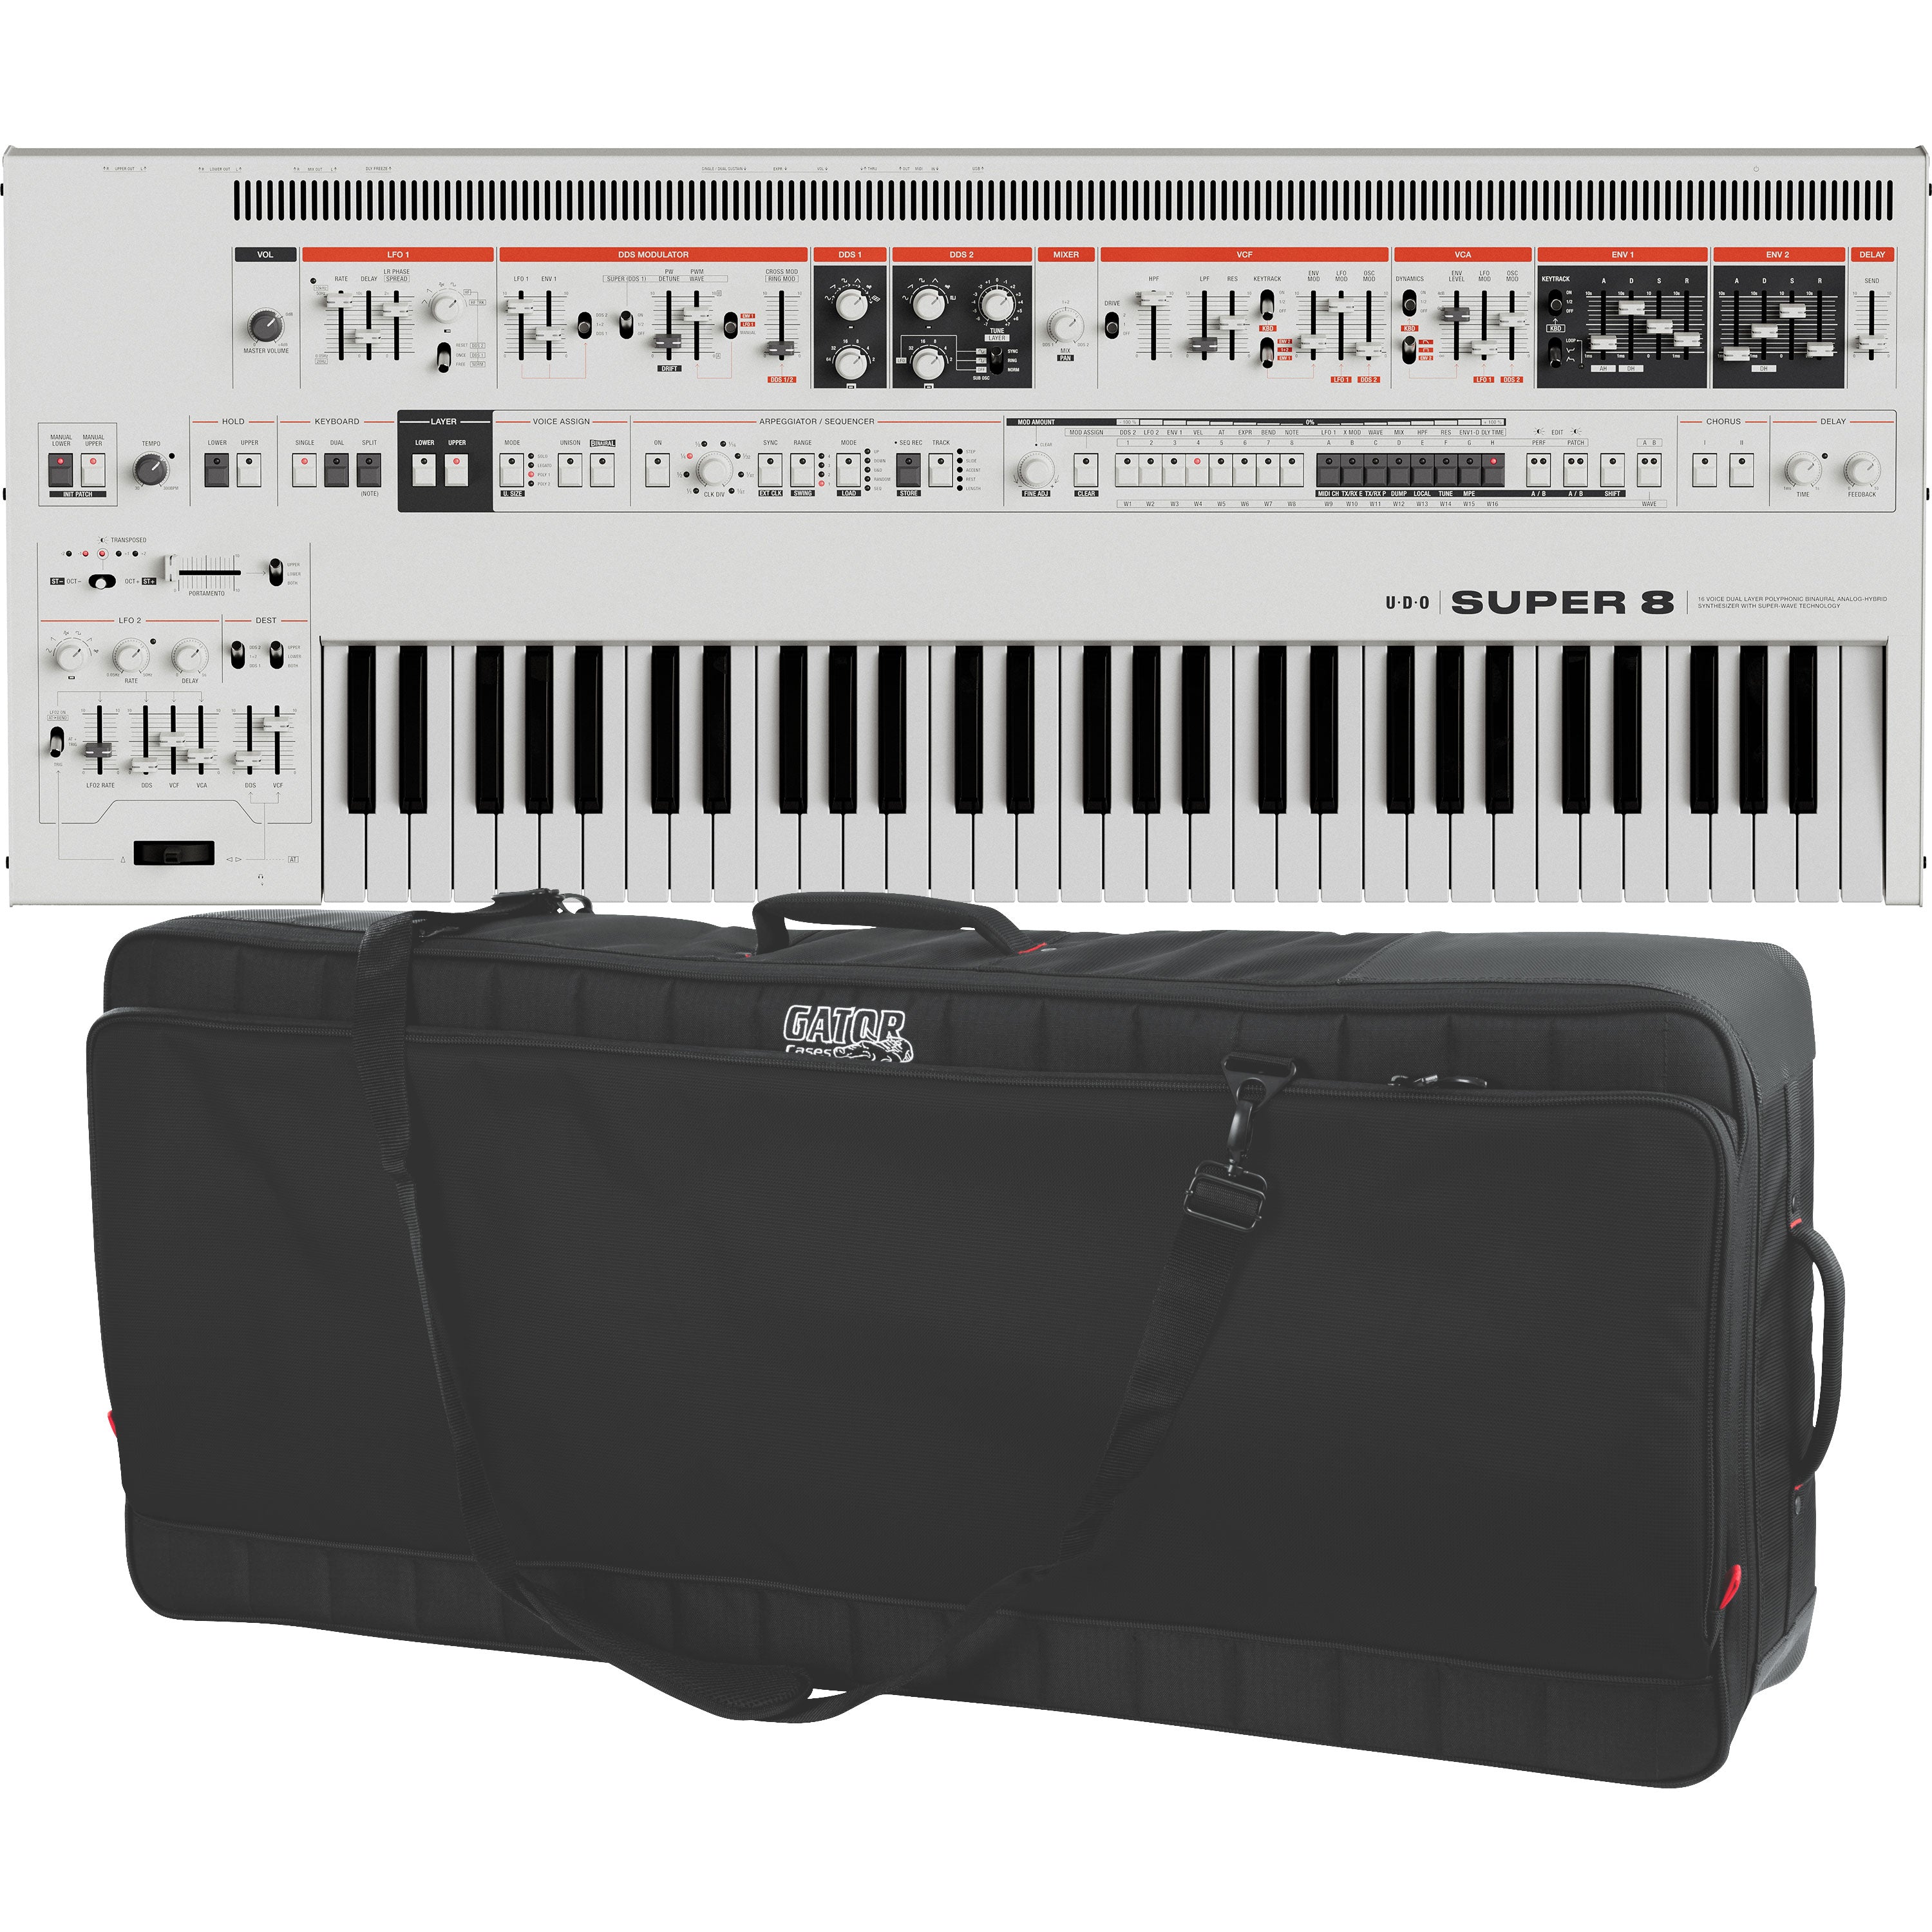 Collage showing components in UDO Audio Super 8 16-Voice Bi-Timbral Keyboard Synthesizer - White CARRY BAG KIT